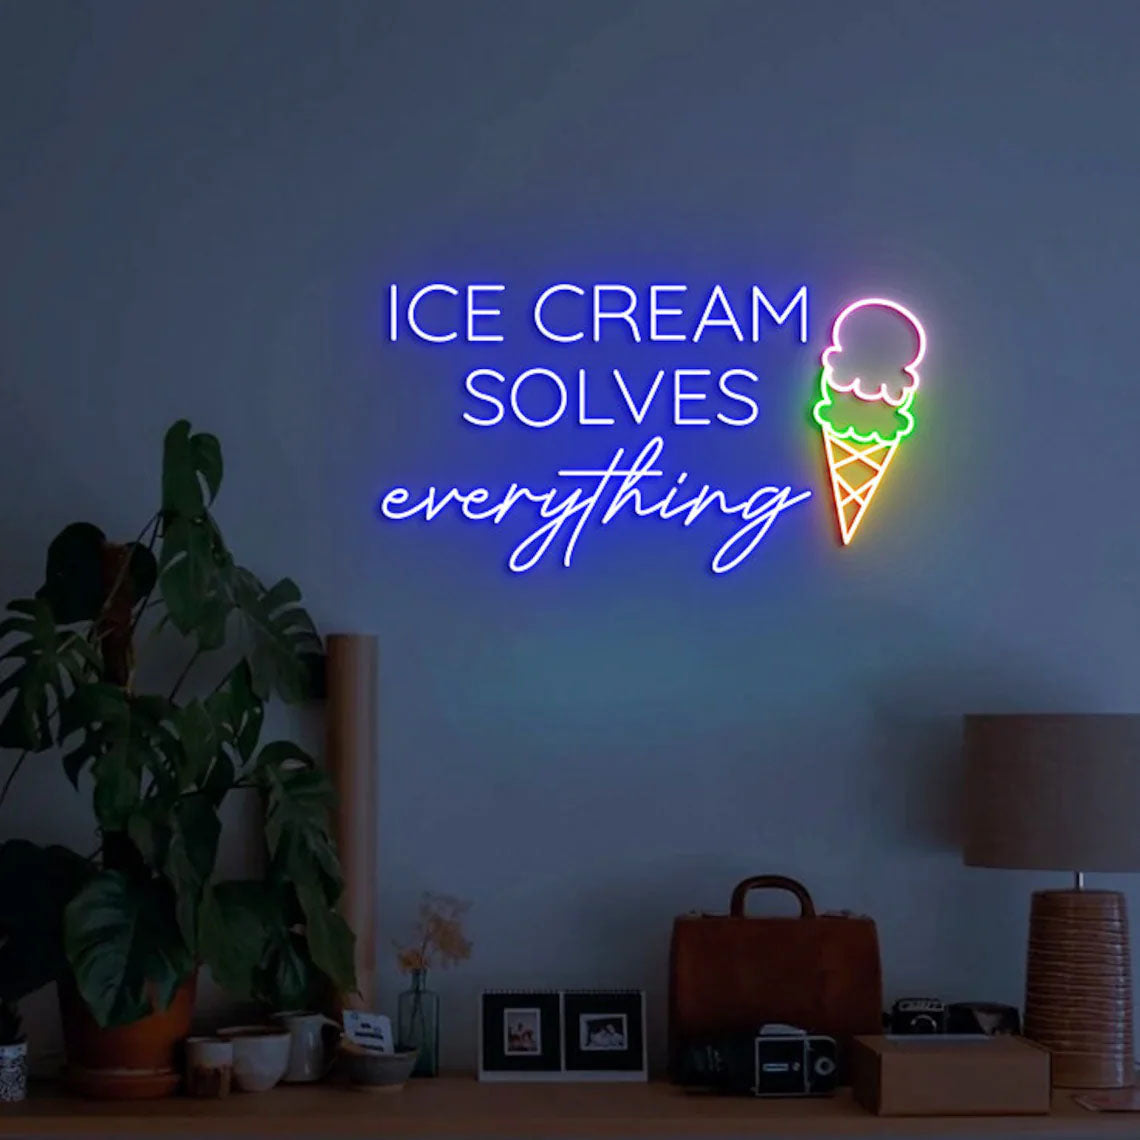 Ice Cream Solves Everything Sign Neon Light, Ice Cream Sign Wall Neon Light, LED Neon Light Sign, Ice Cream Shop Neon Sign Wall Décor